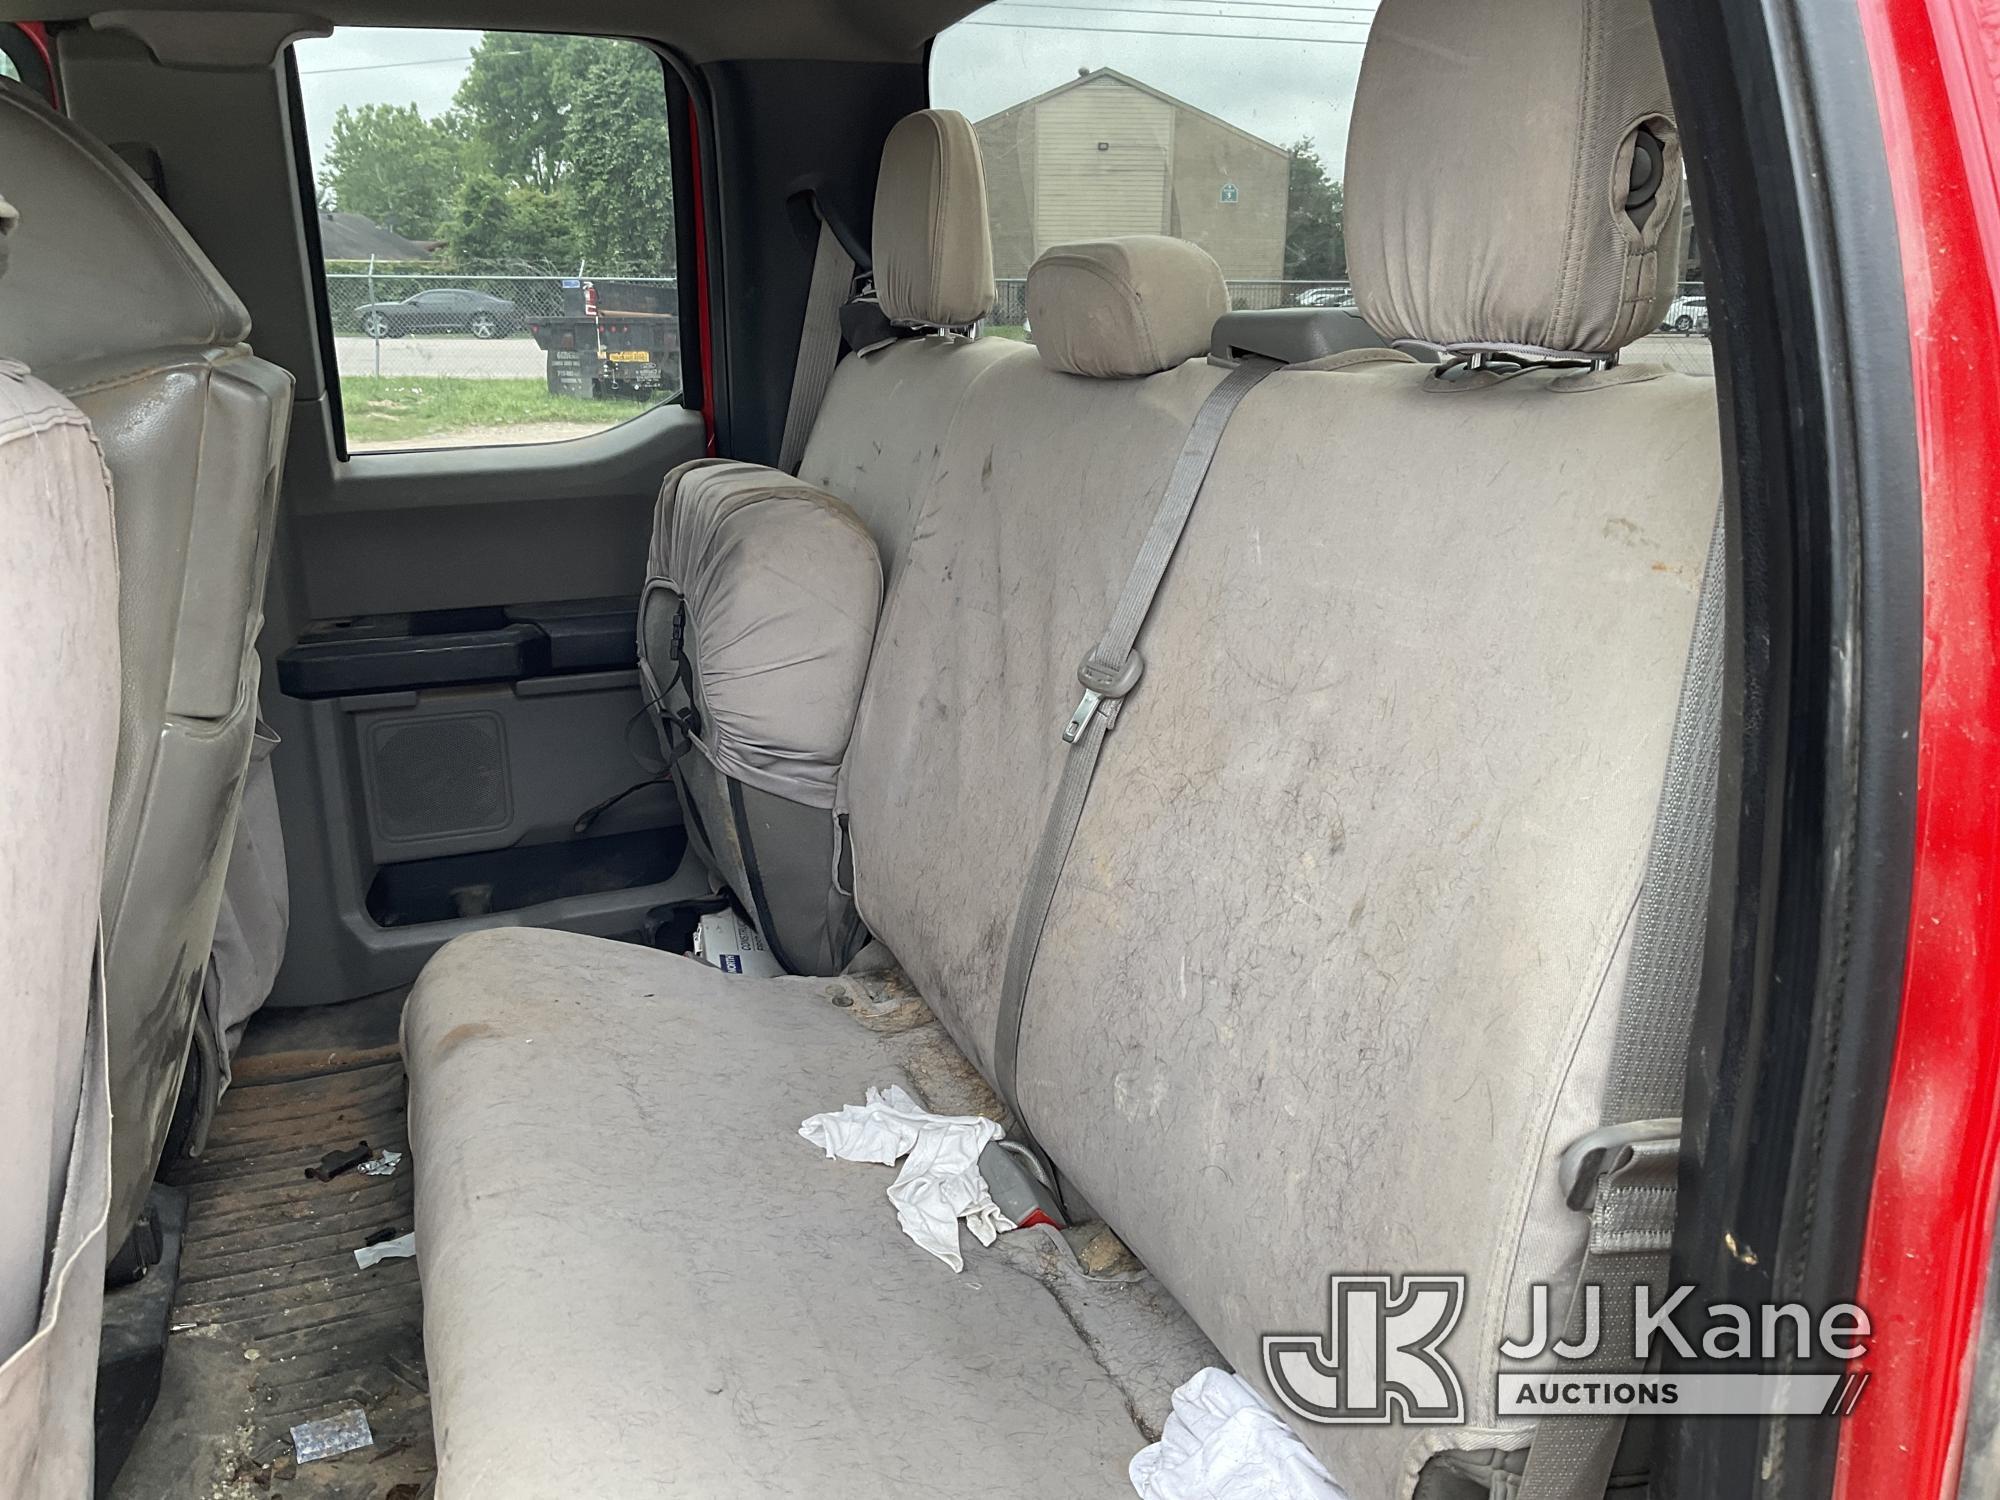 (Cypress, TX) 2019 Ford F150 4x4 Extended-Cab Pickup Truck Runs & Moves) (Jump To Start, Check Engin